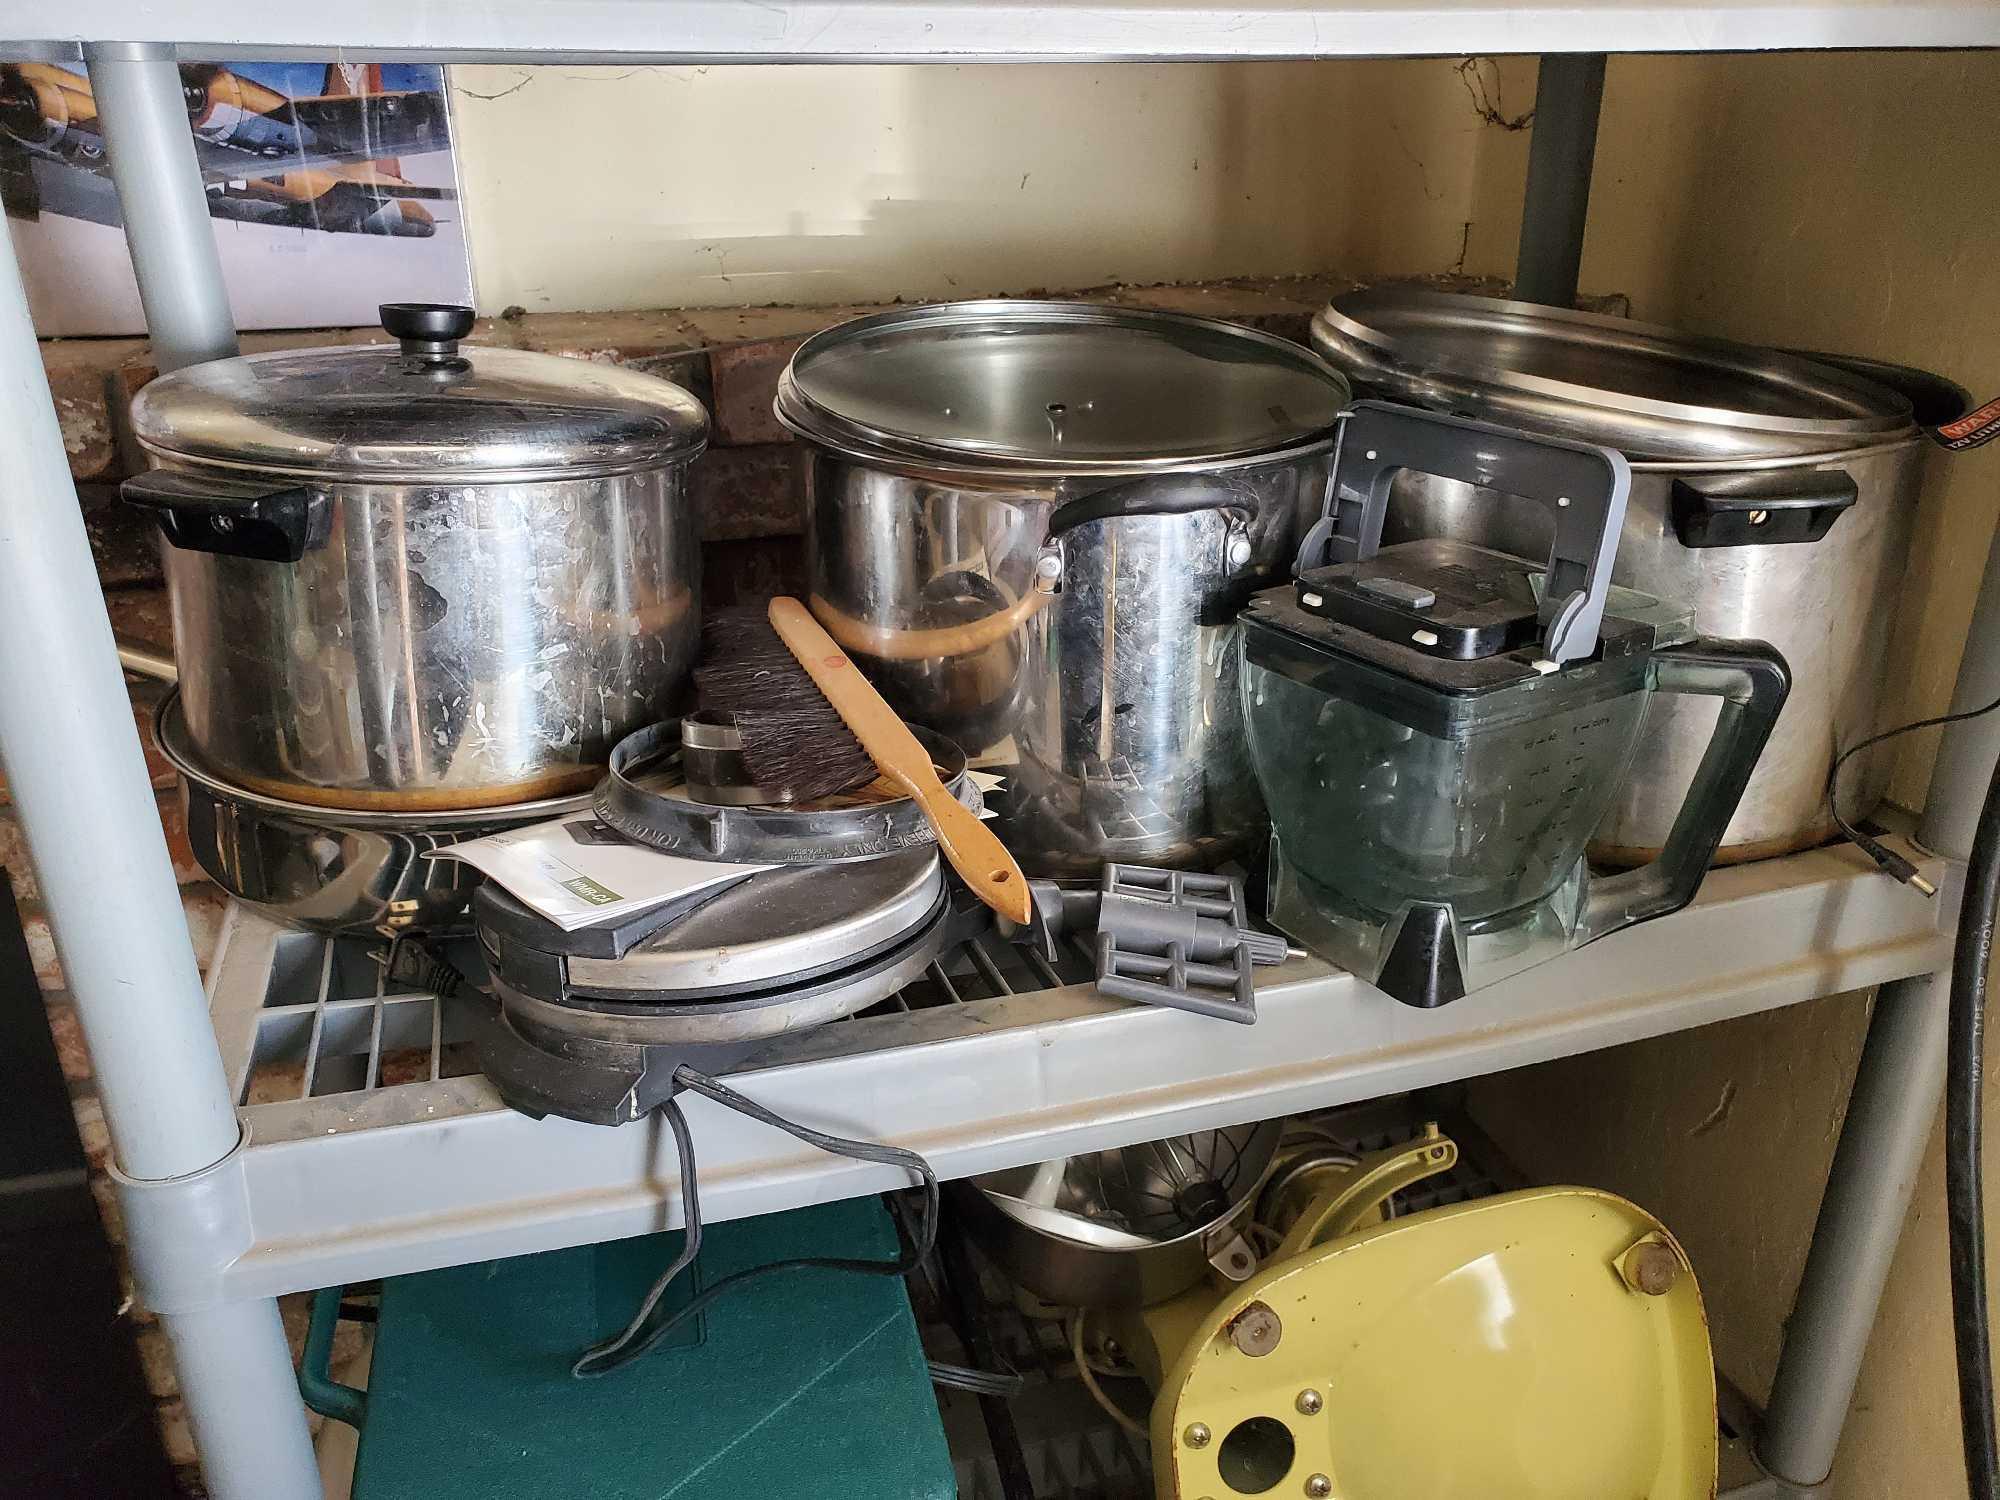 RACK WITH KITCHEN COOKING EQUIPMENT